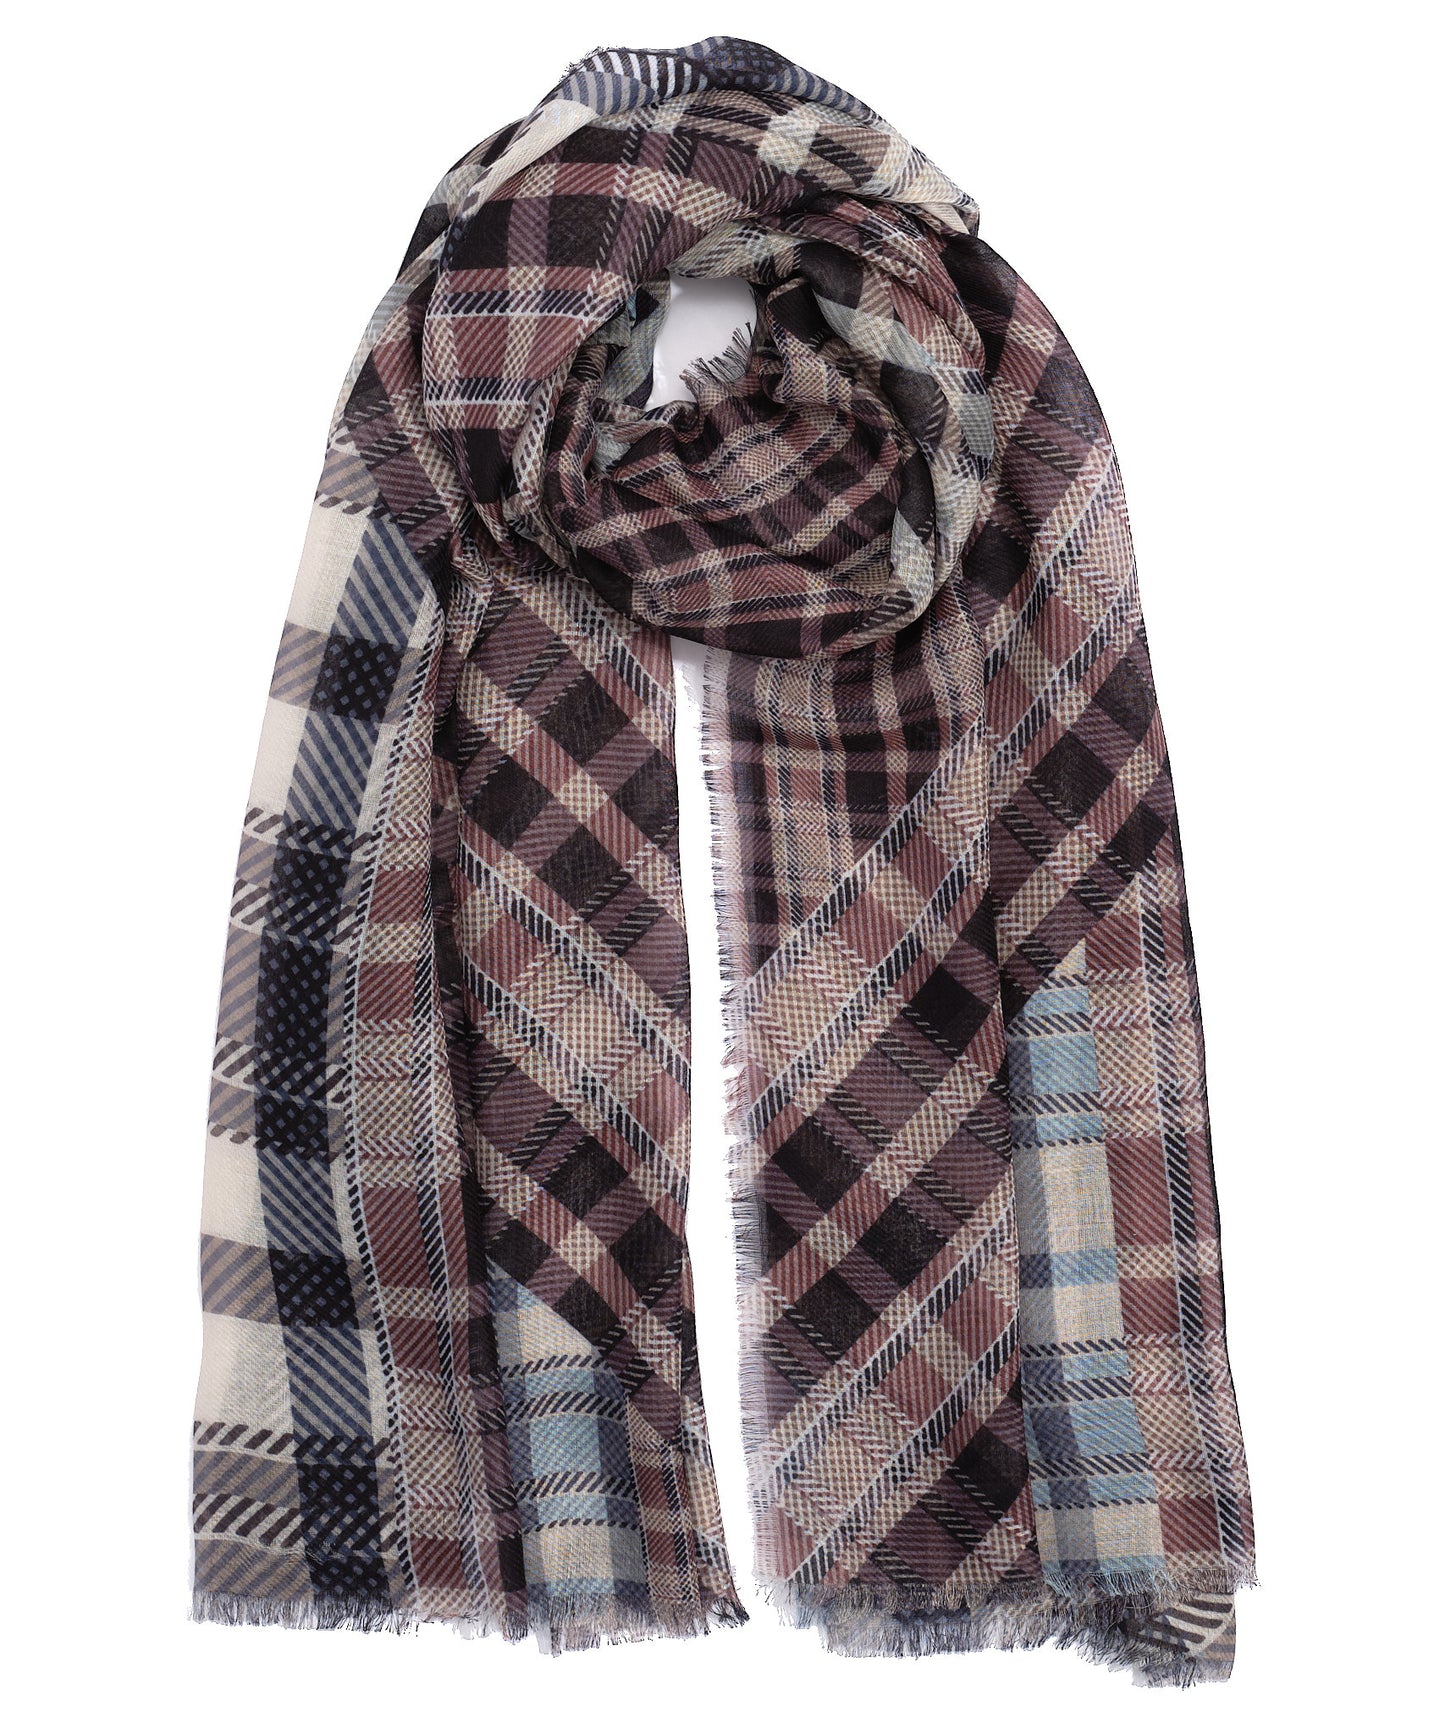 Patched Plaid Wrap in color Black